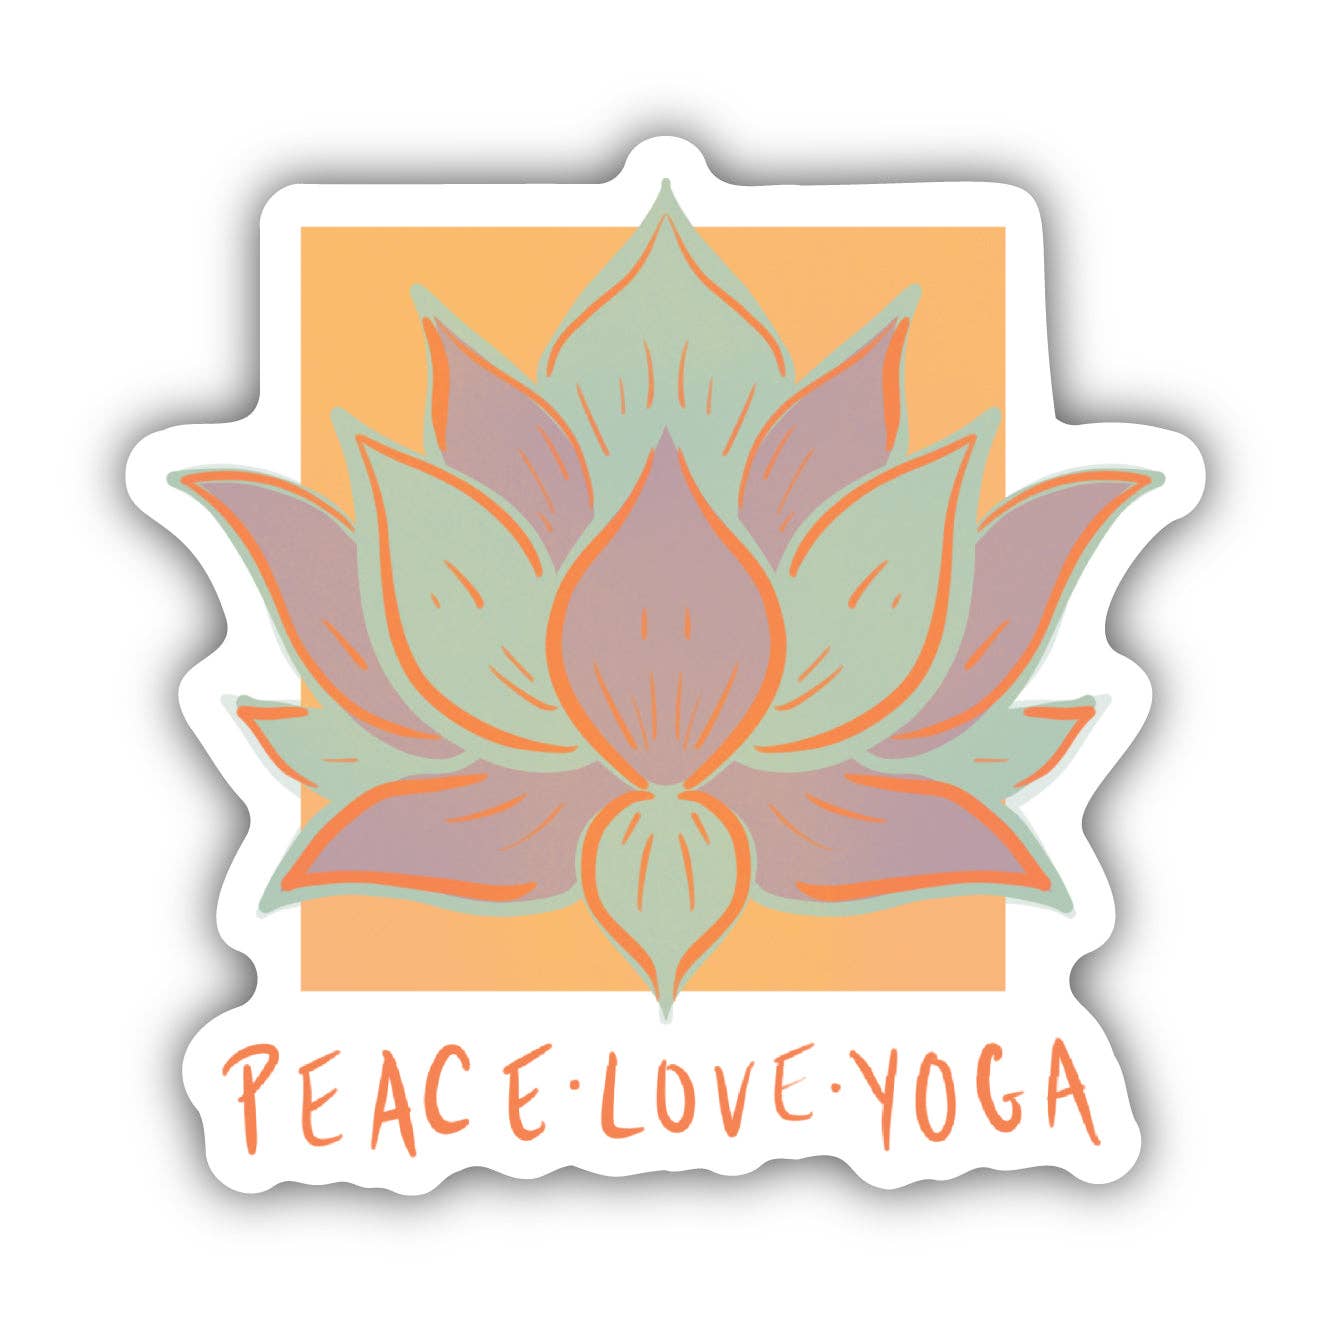 "Peace. Love. Yoga" Sticker - Sacred Crystals Stickers